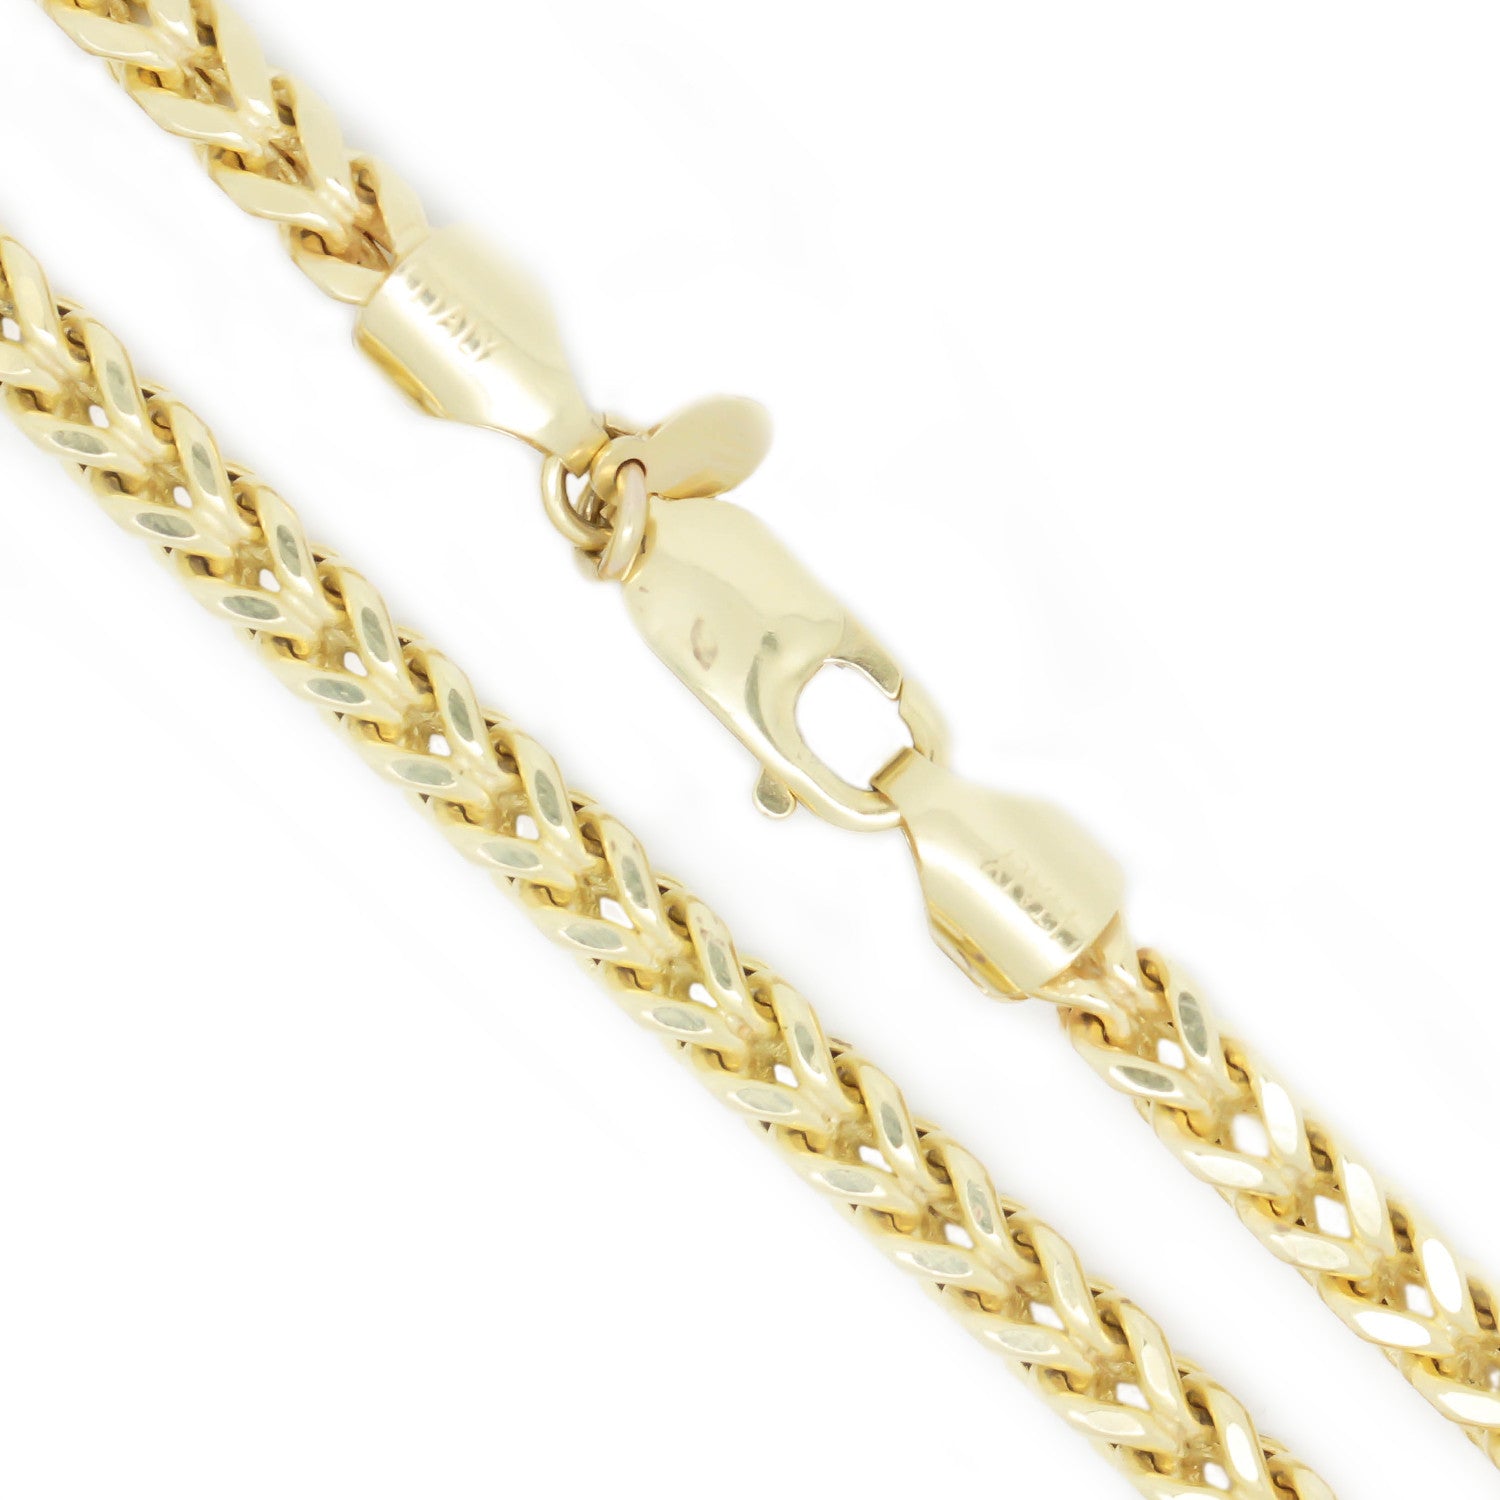 10K Yellow Gold 4.2 mm Franco Chain Necklace 30 Inches Diamond Cut